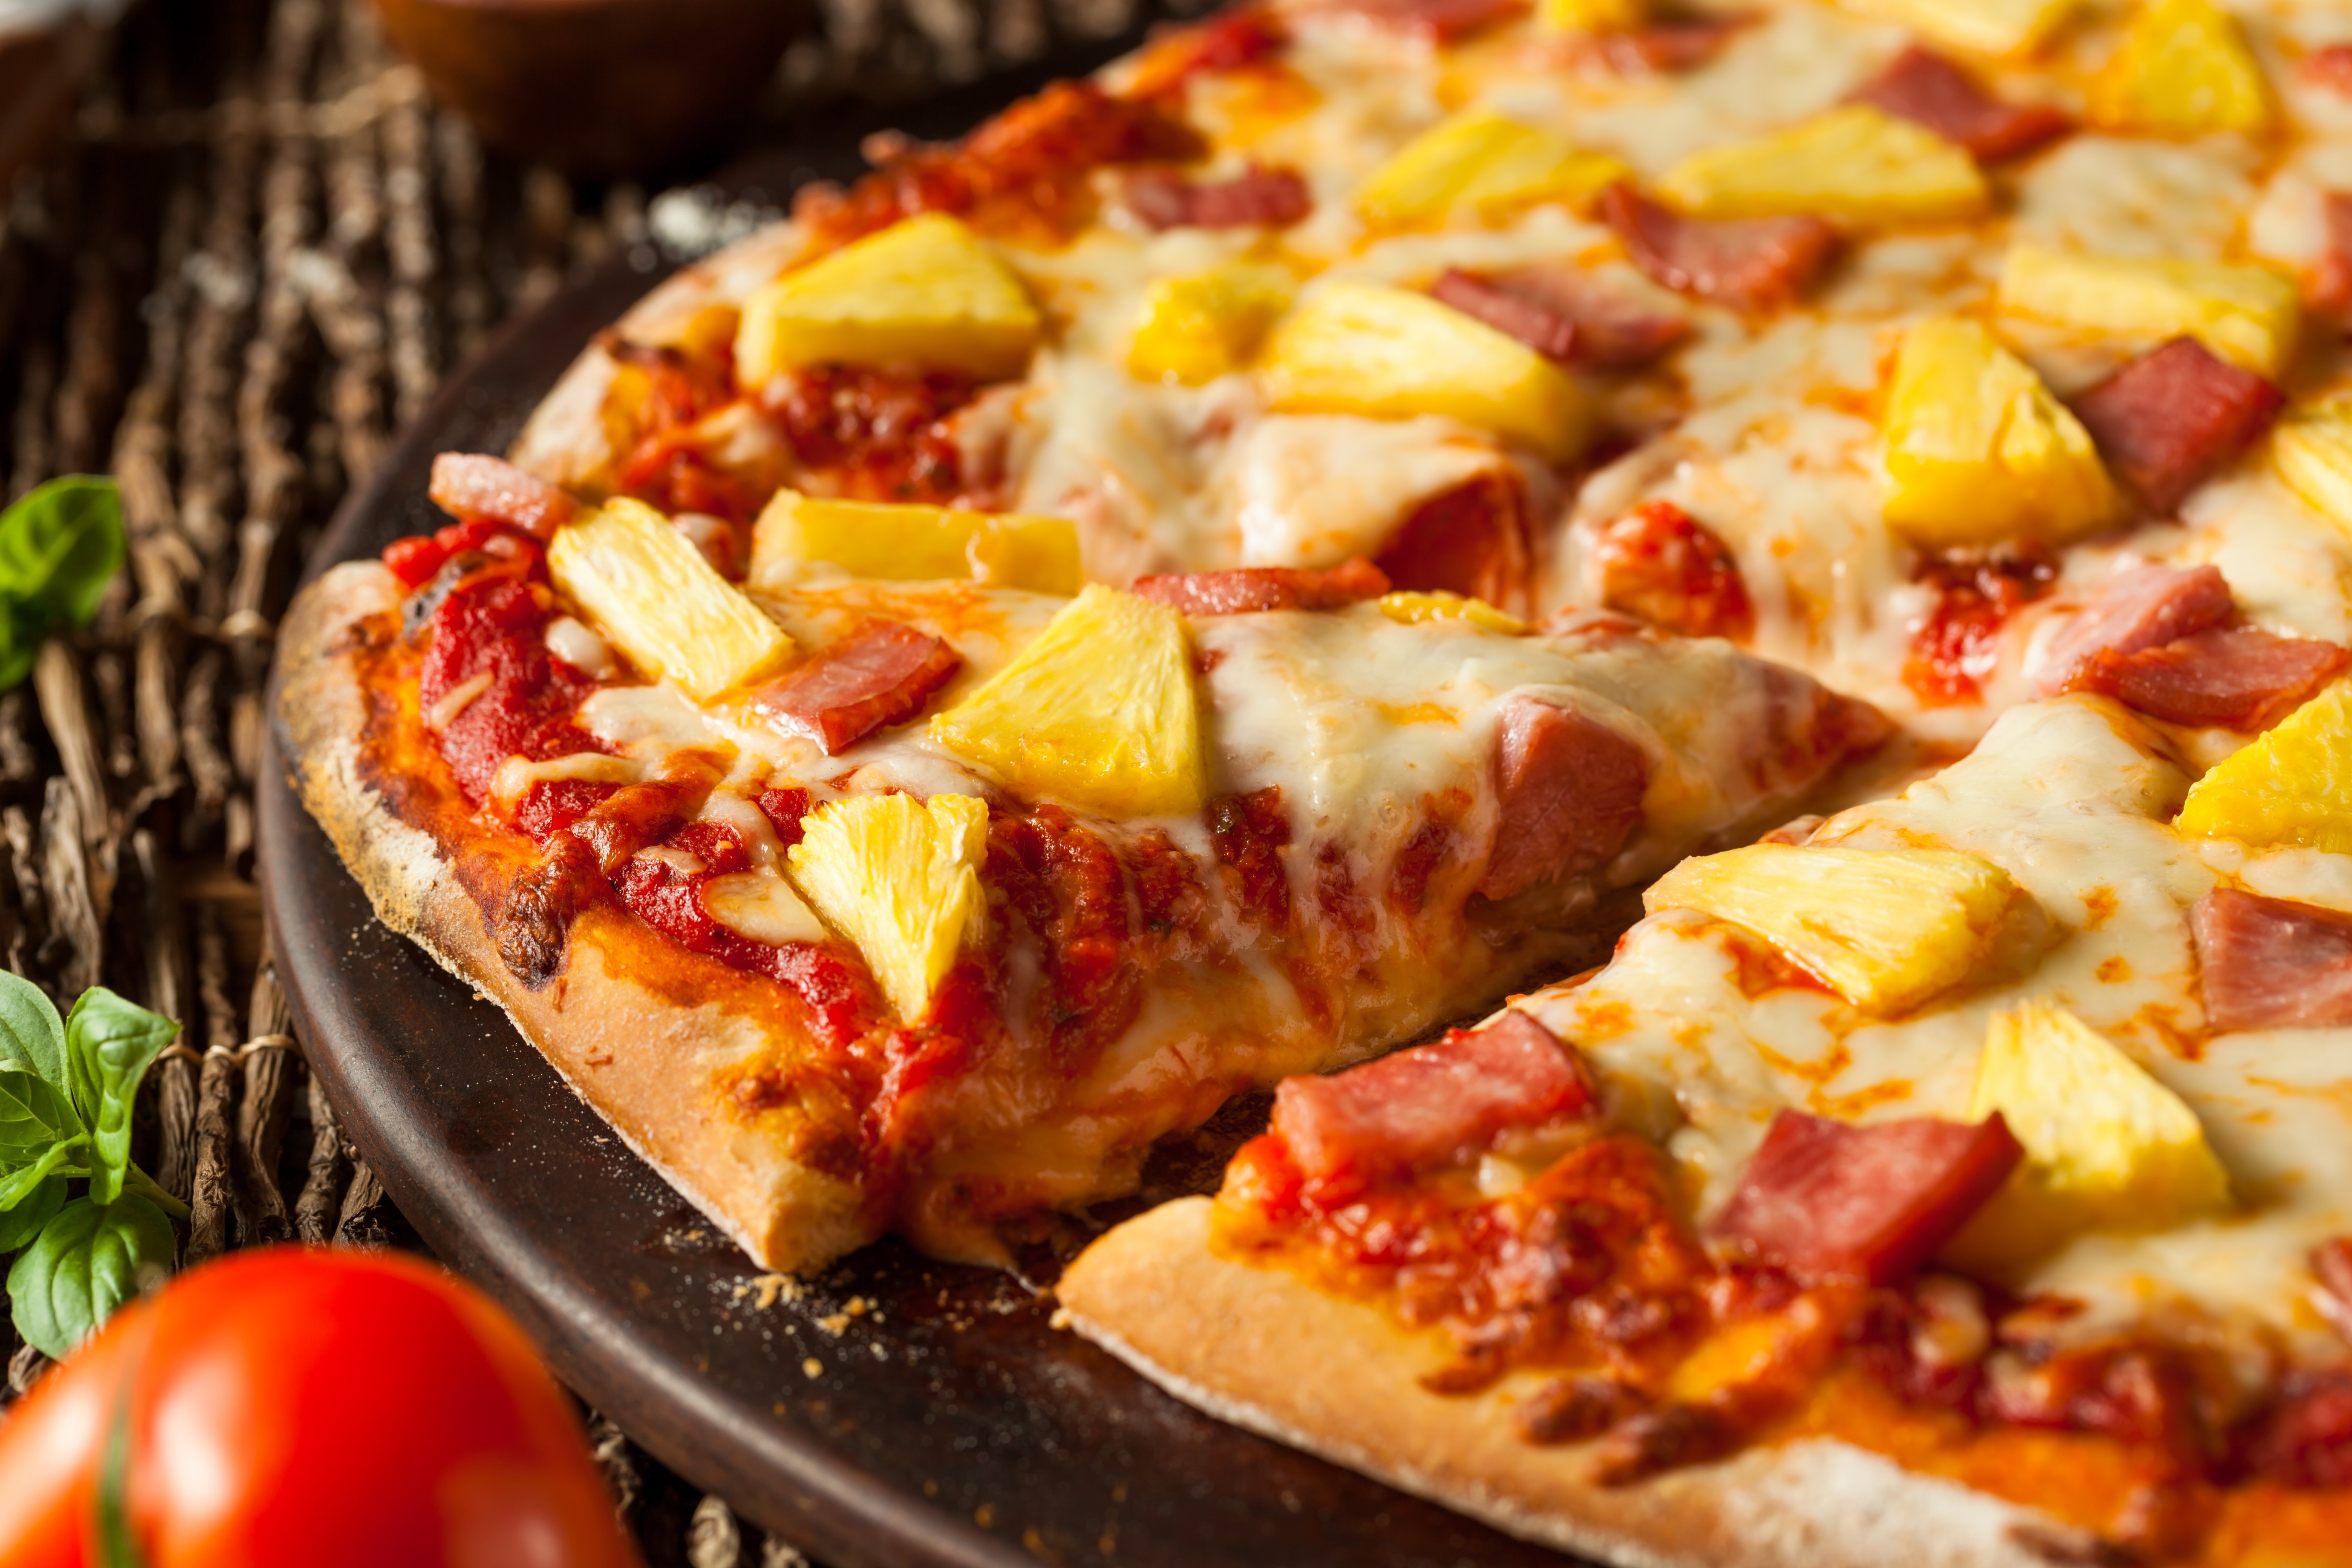 Homemade Pineapple and Ham Hawaiian Pizza Ready to Eat (bhofack2--;Getty Images/iStockphoto)